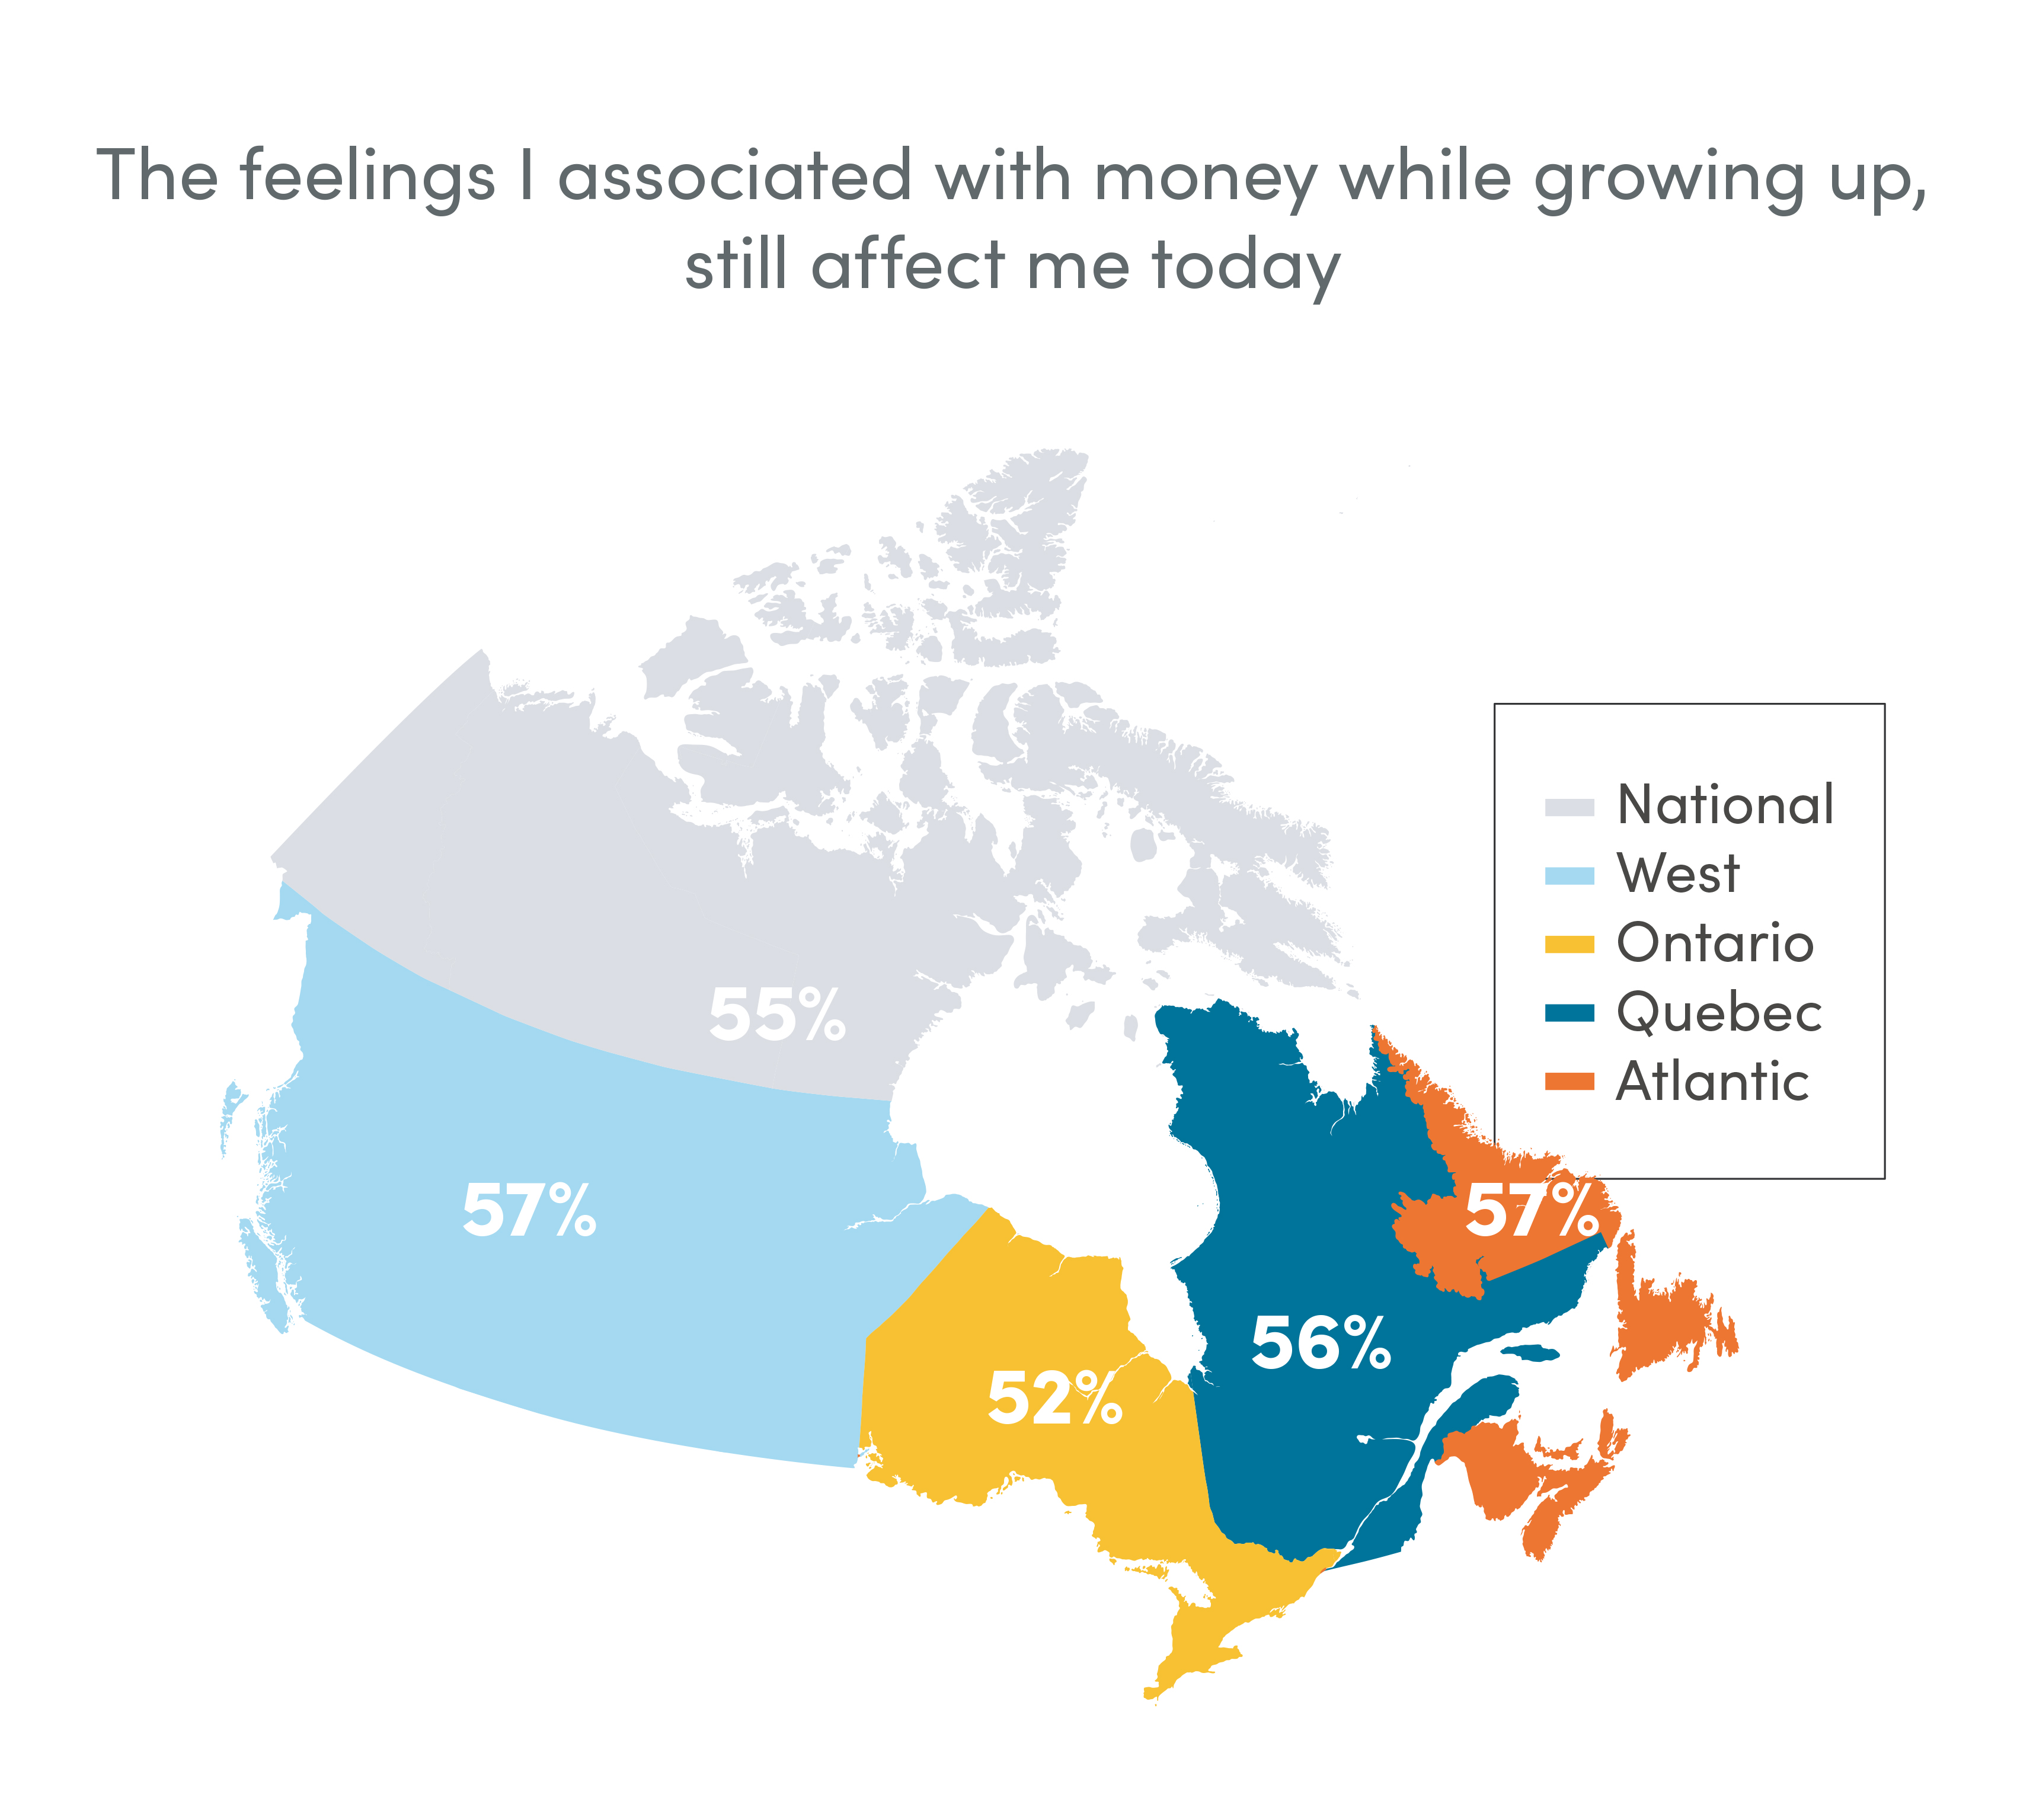 Map of Canada showing the percentage of people who said that the feelings they had about money growing up still affect them today, broken down by area